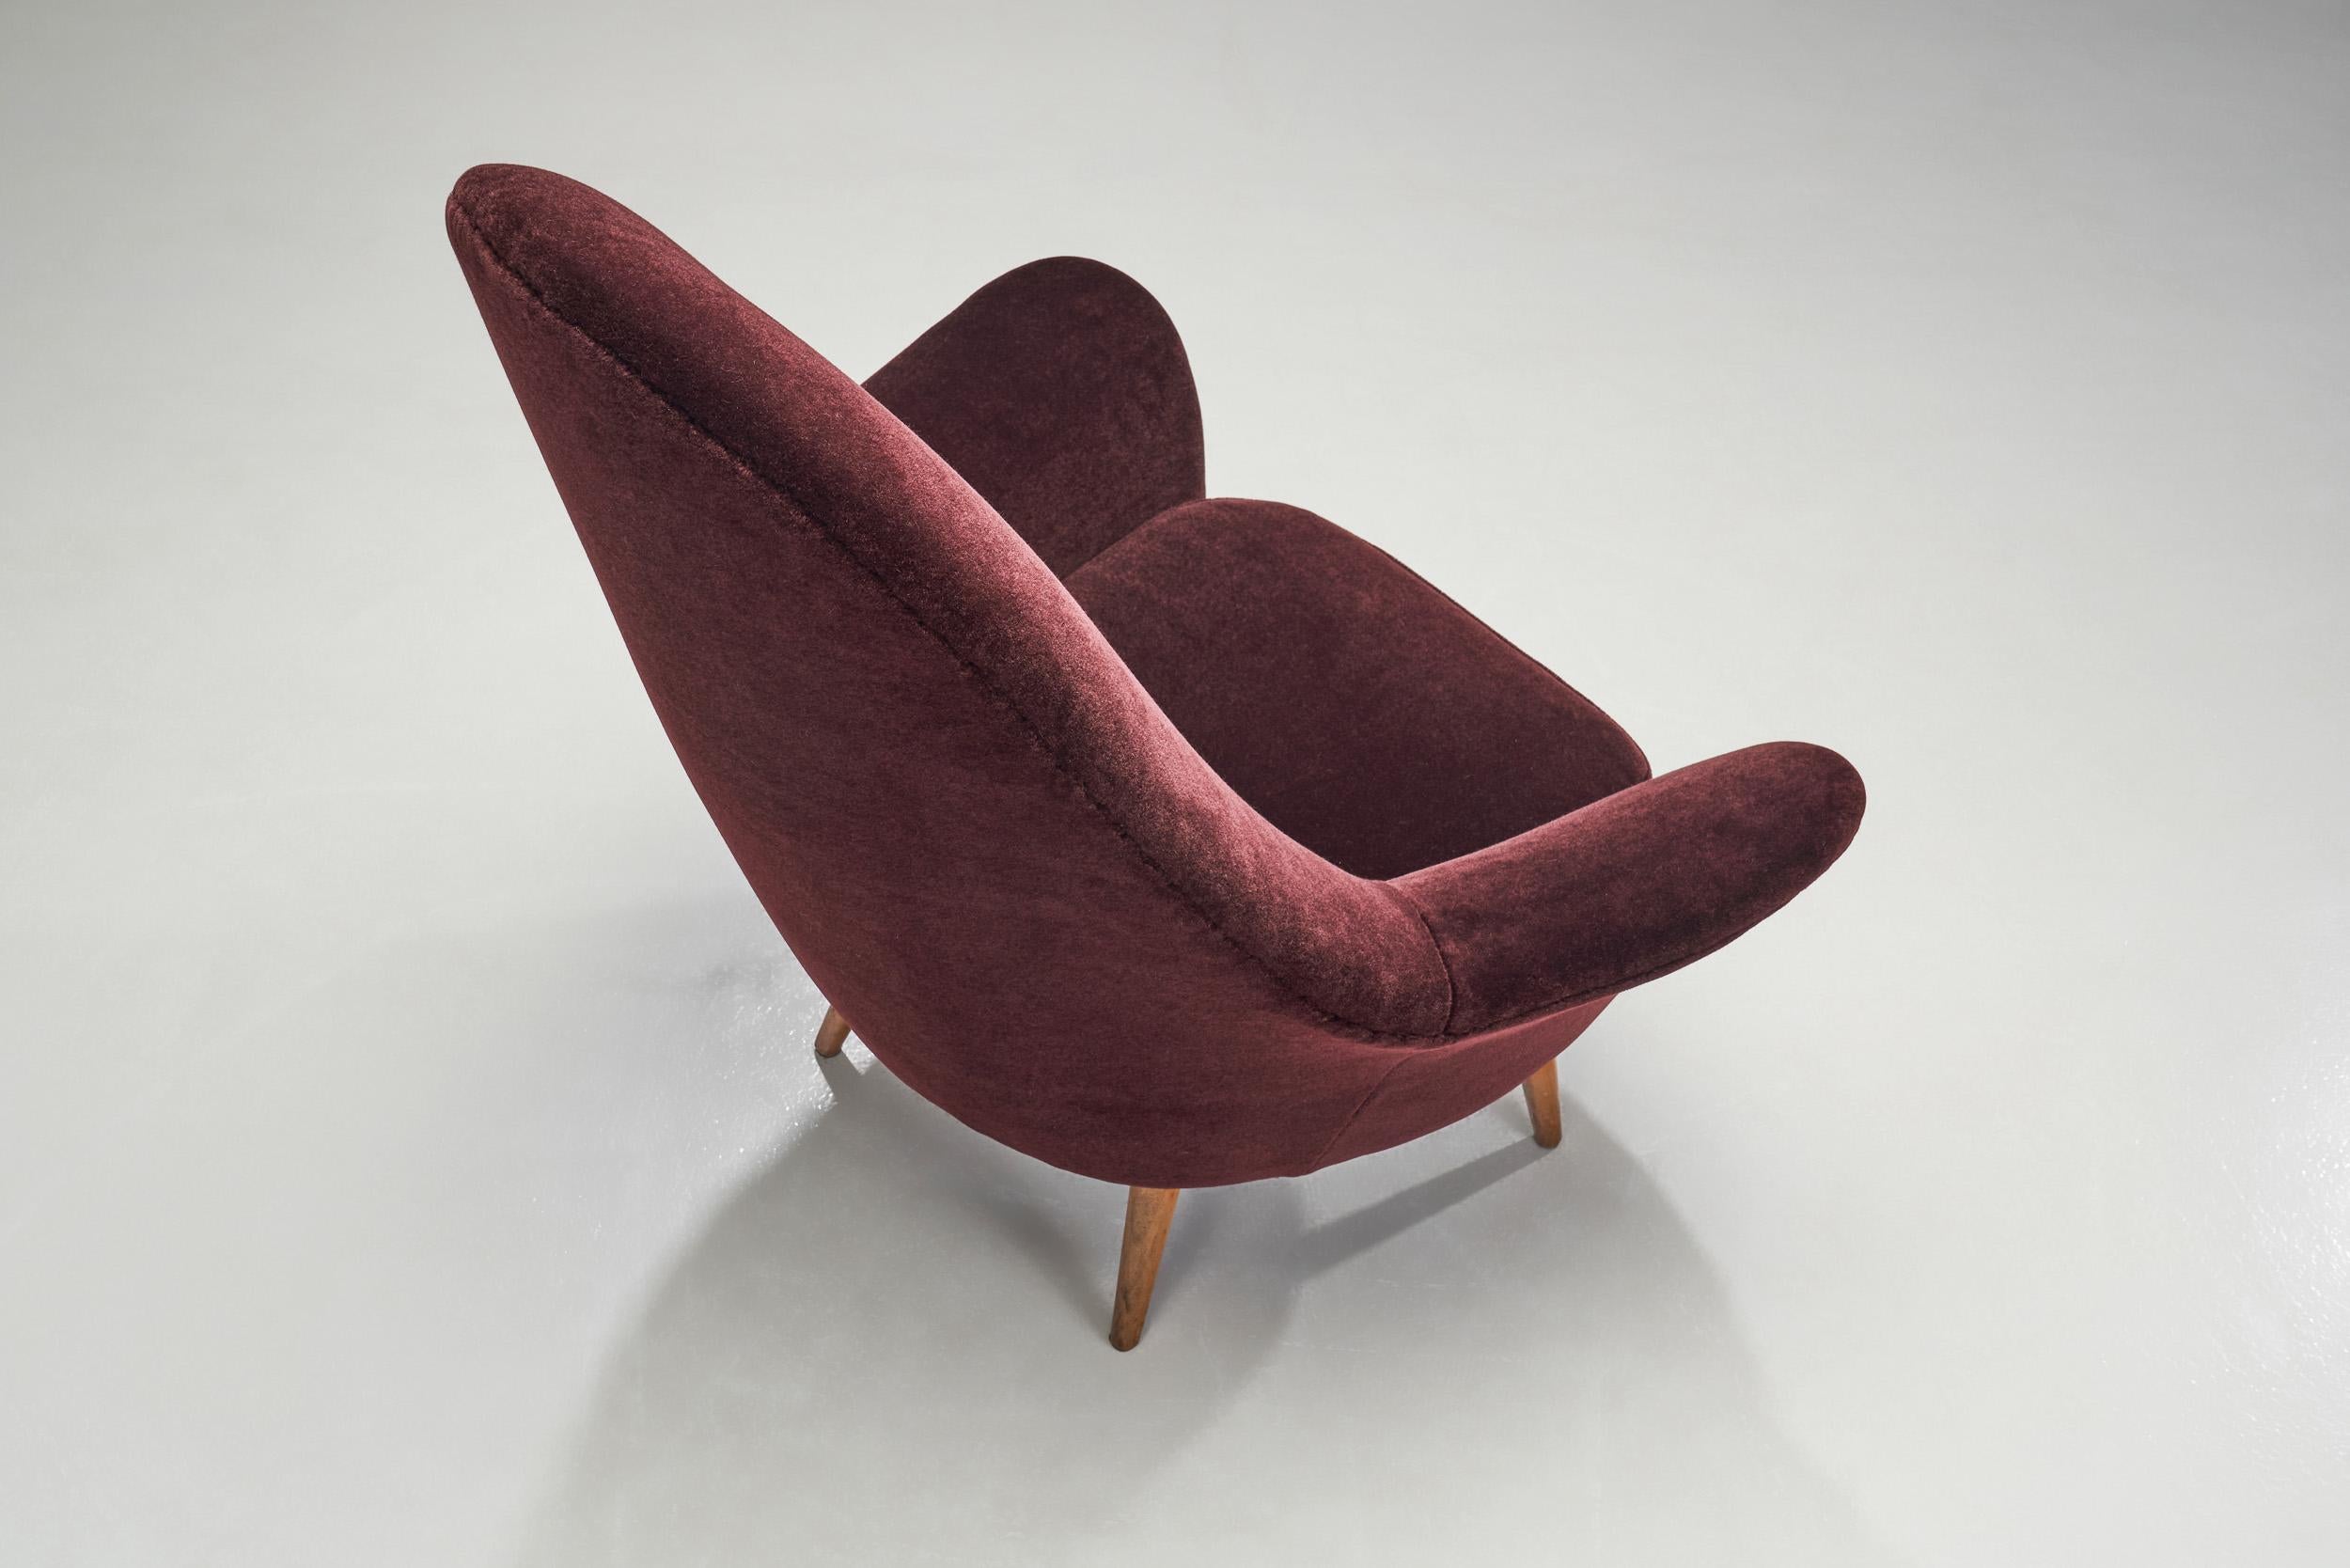 20th Century French Lounge Chairs In Aubergine Coloured Mohair, France ca 1960s For Sale